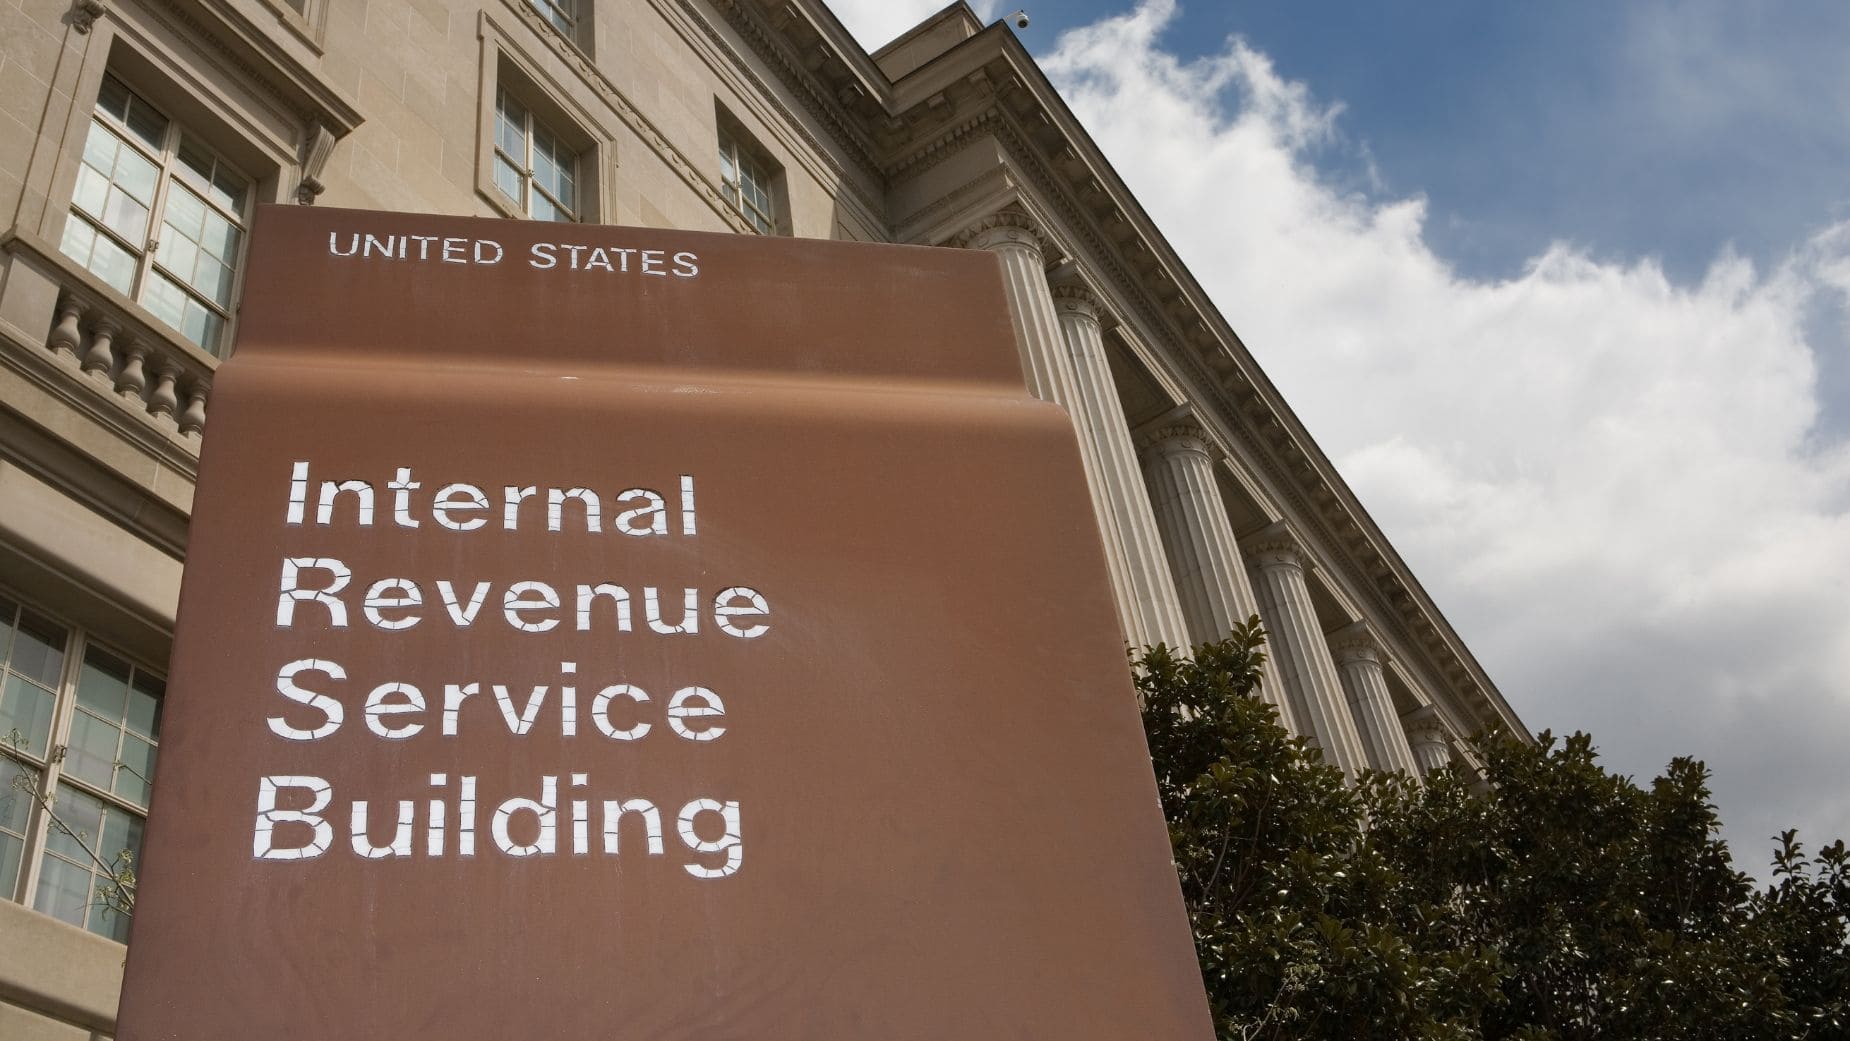 If you have a Disability you could pay less taxes to the IRS